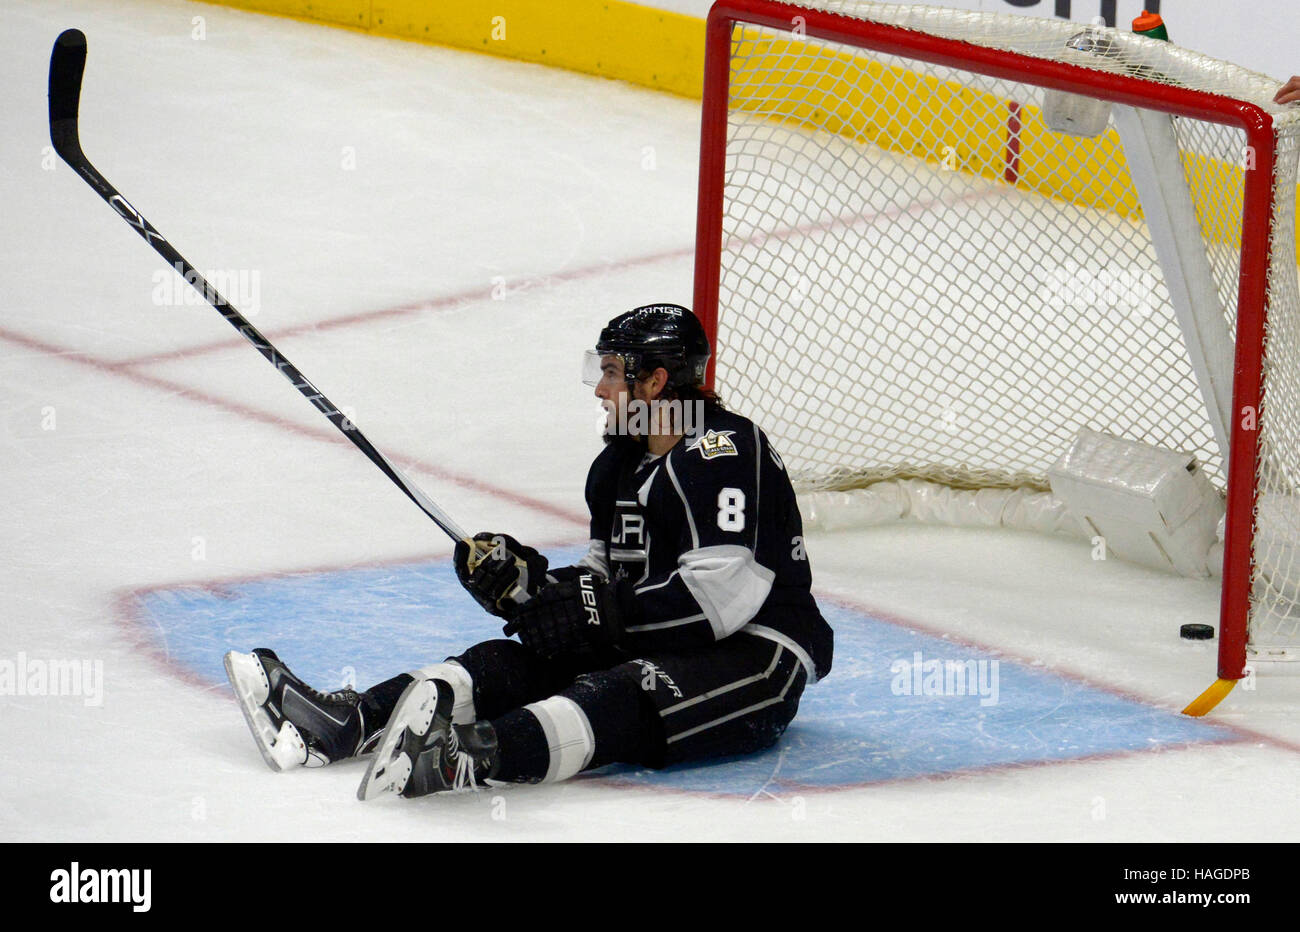 Download wallpapers Drew Doughty, abstract art, hockey players